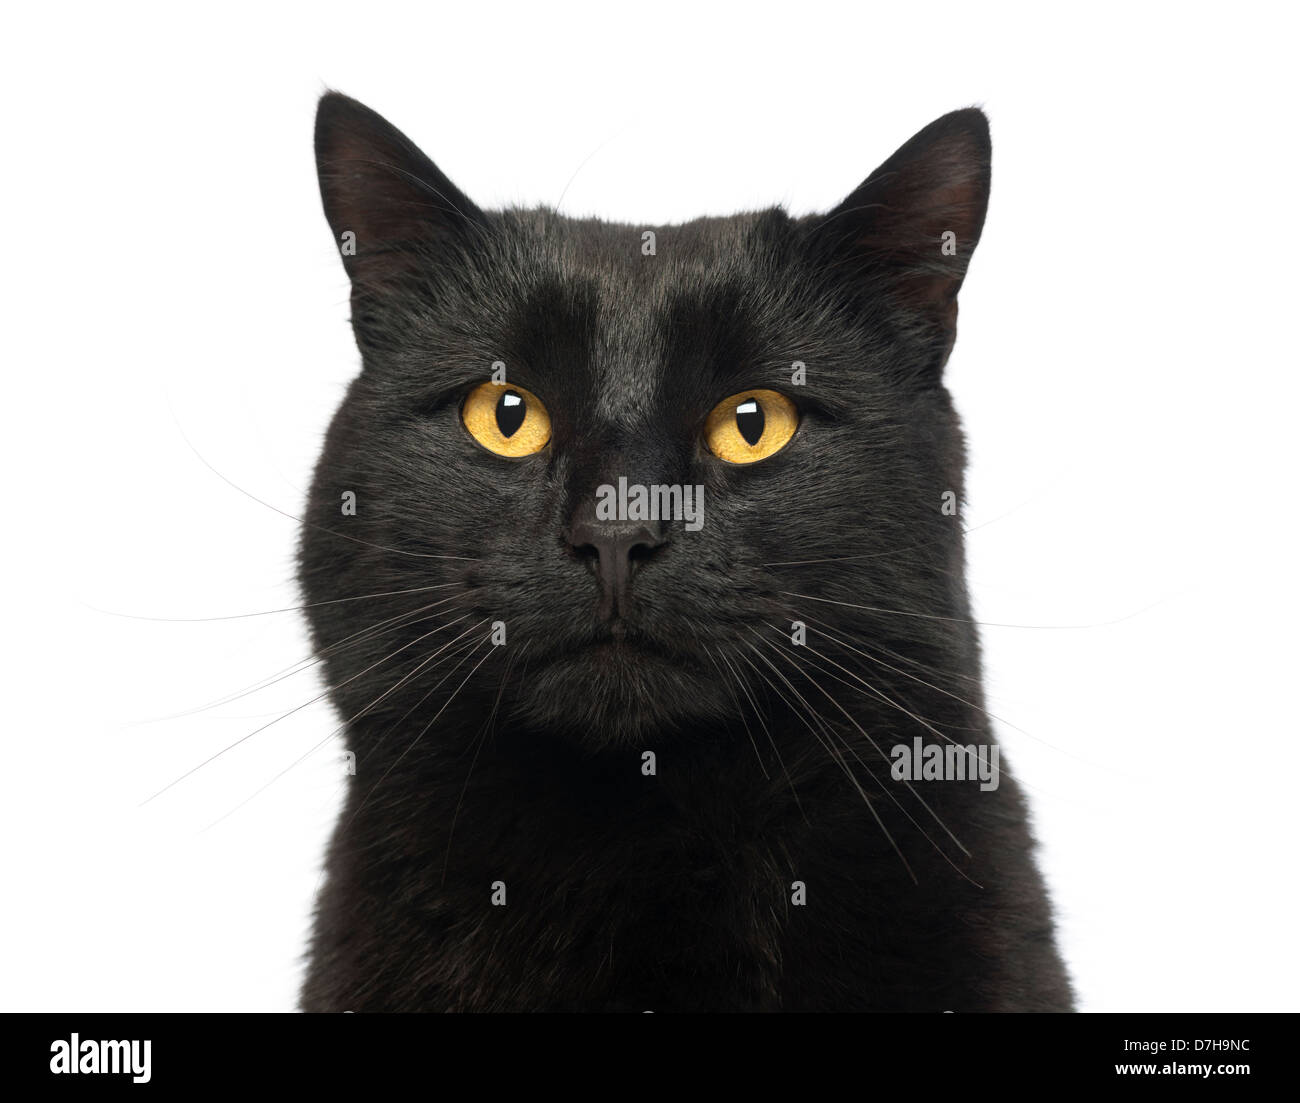 Close-up of a Black Cat looking up against white background Stock Photo